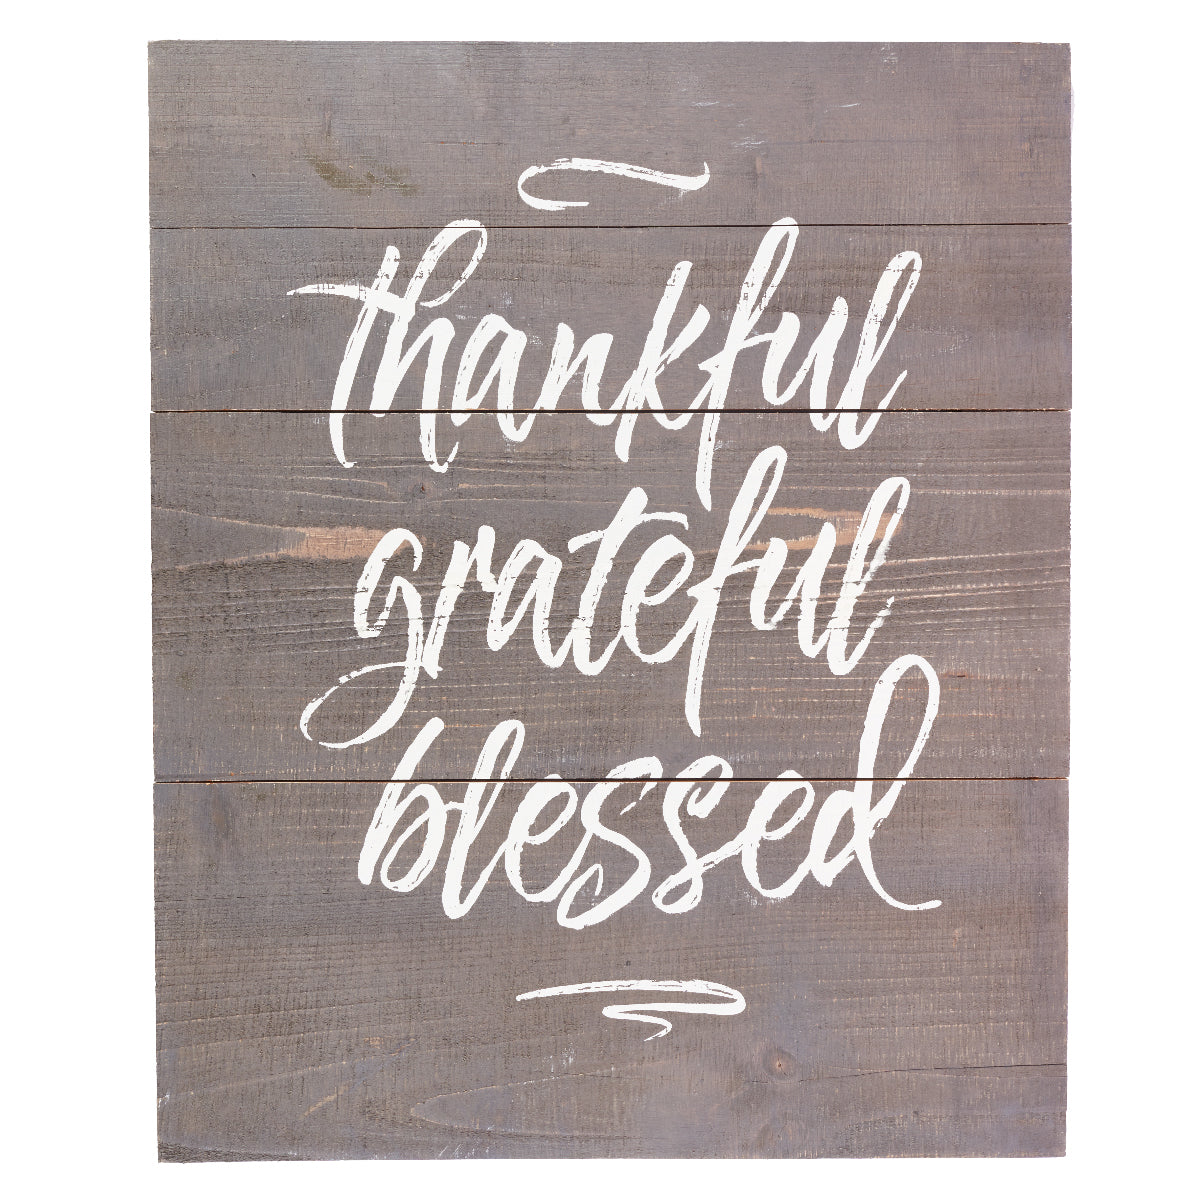 Image of Thankful Grateful Blessed Plank Wall Art other